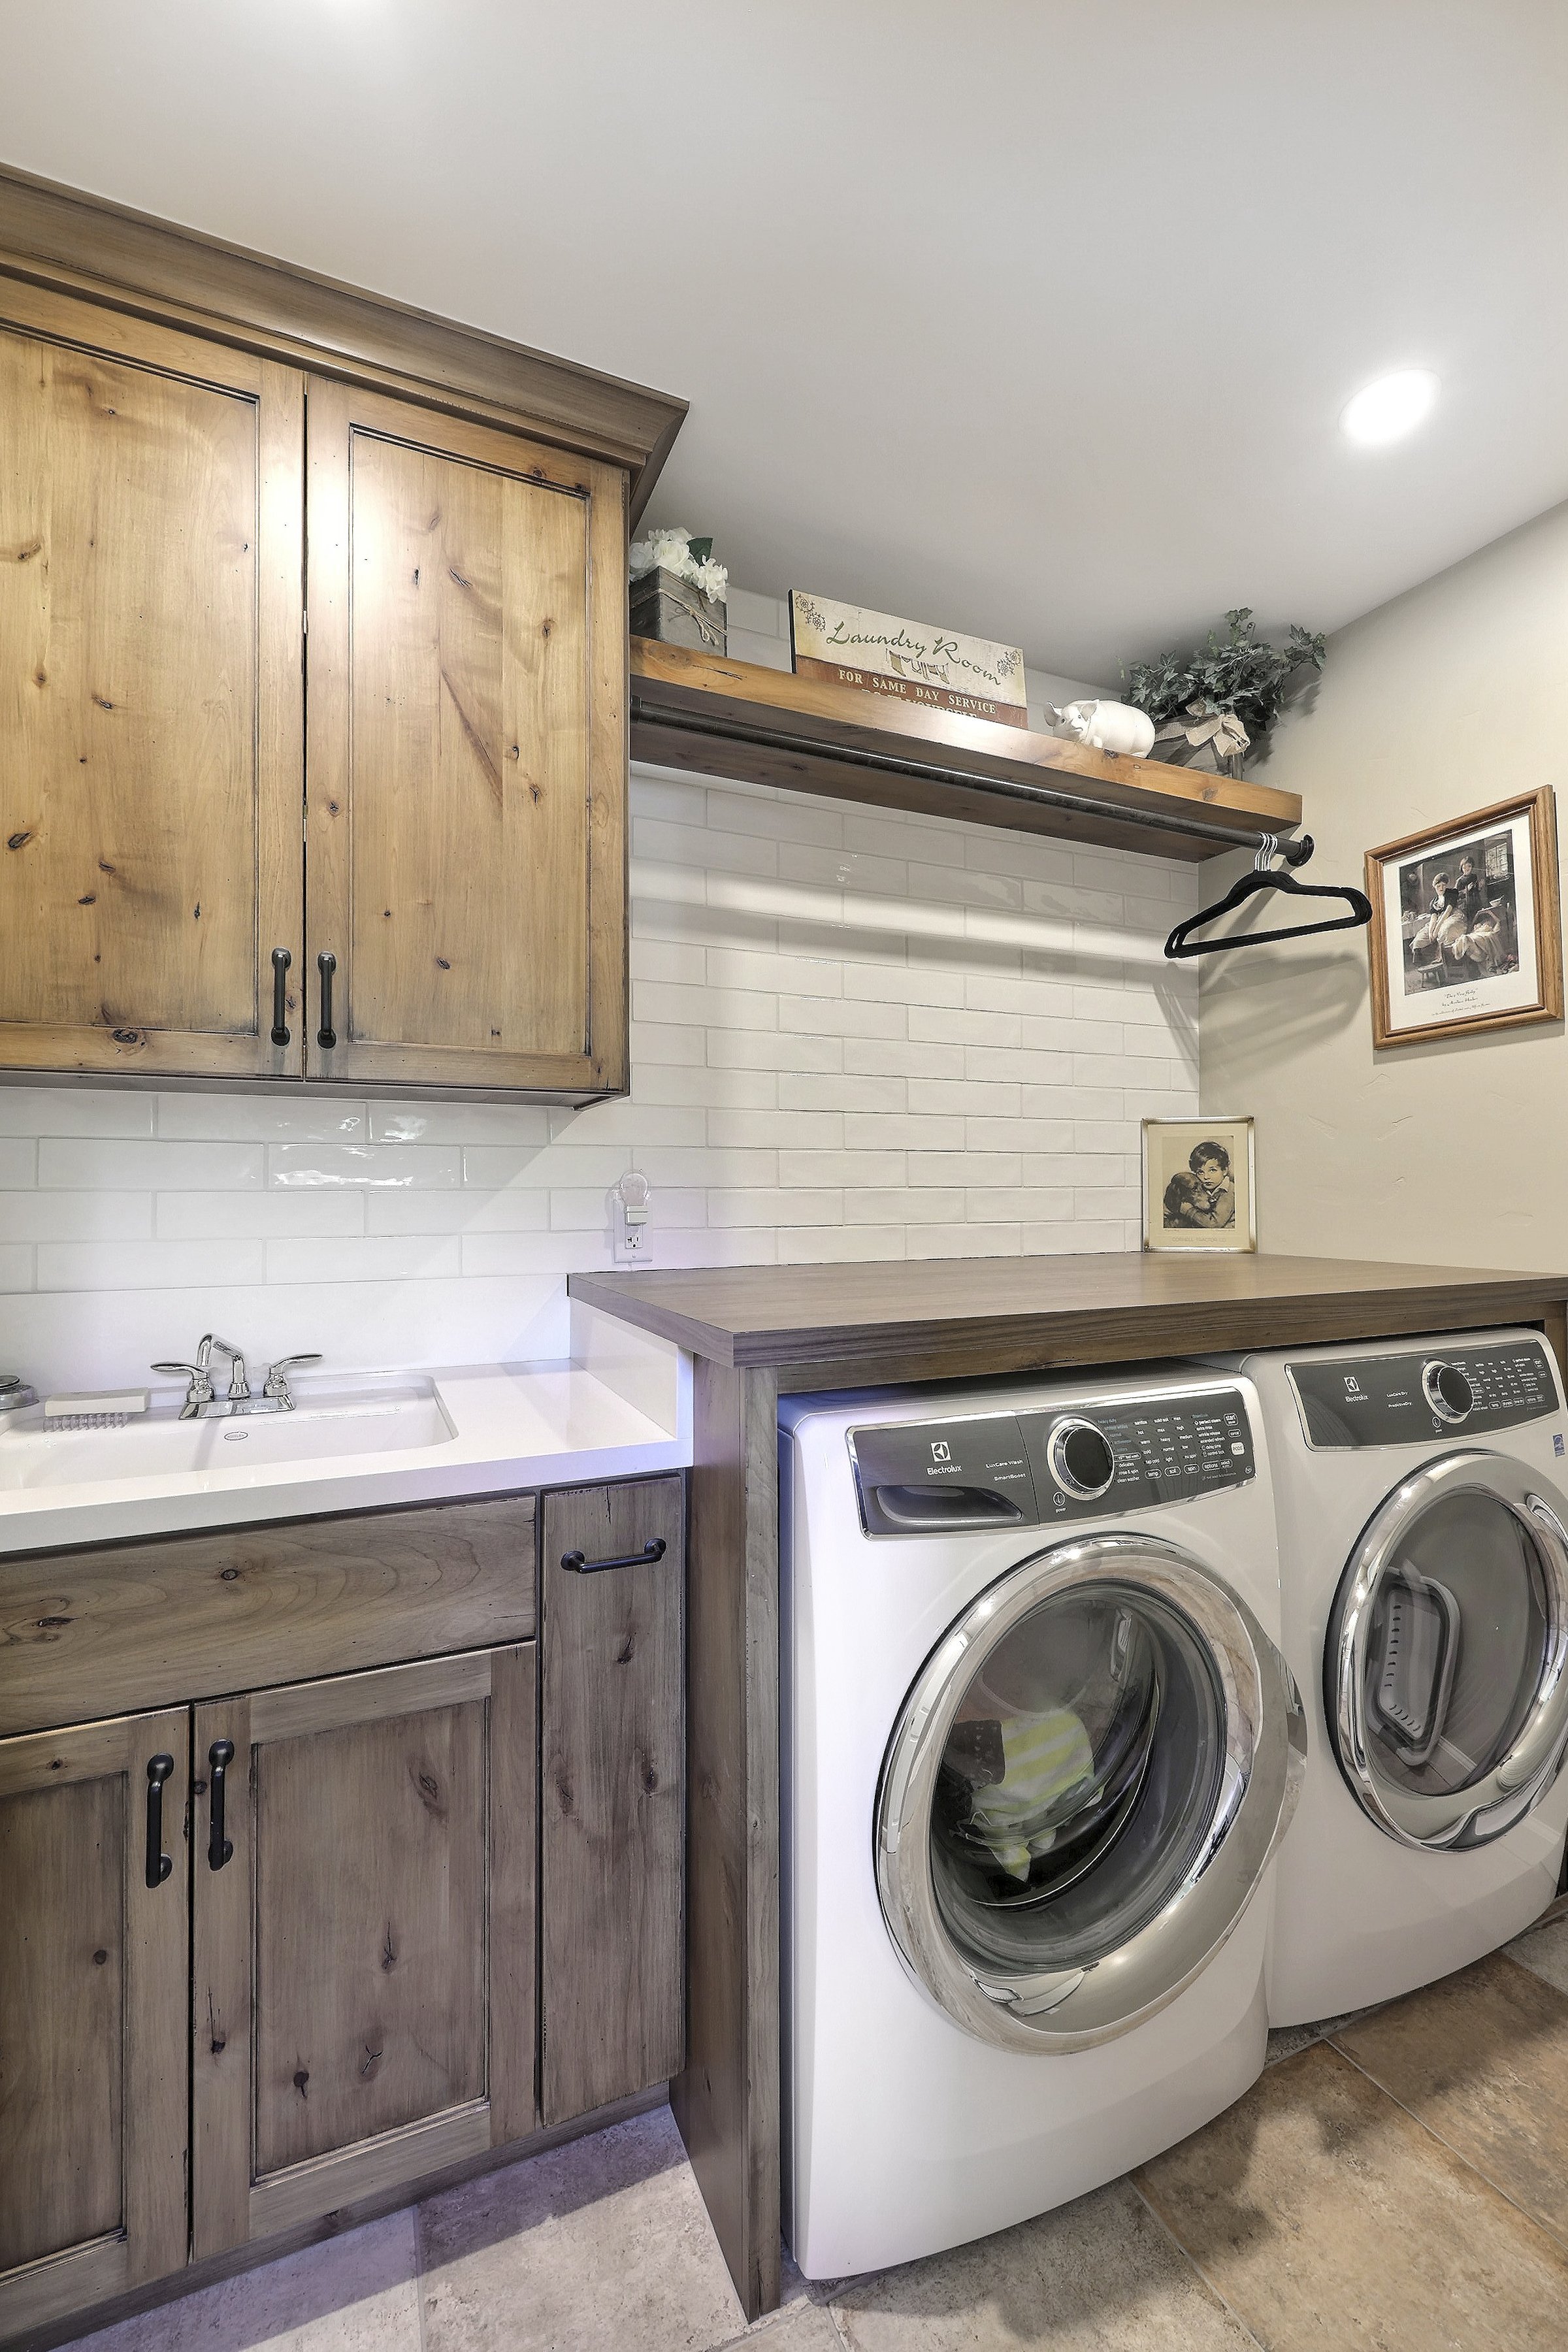 This laundry room is one we wouldn't mind escaping to!